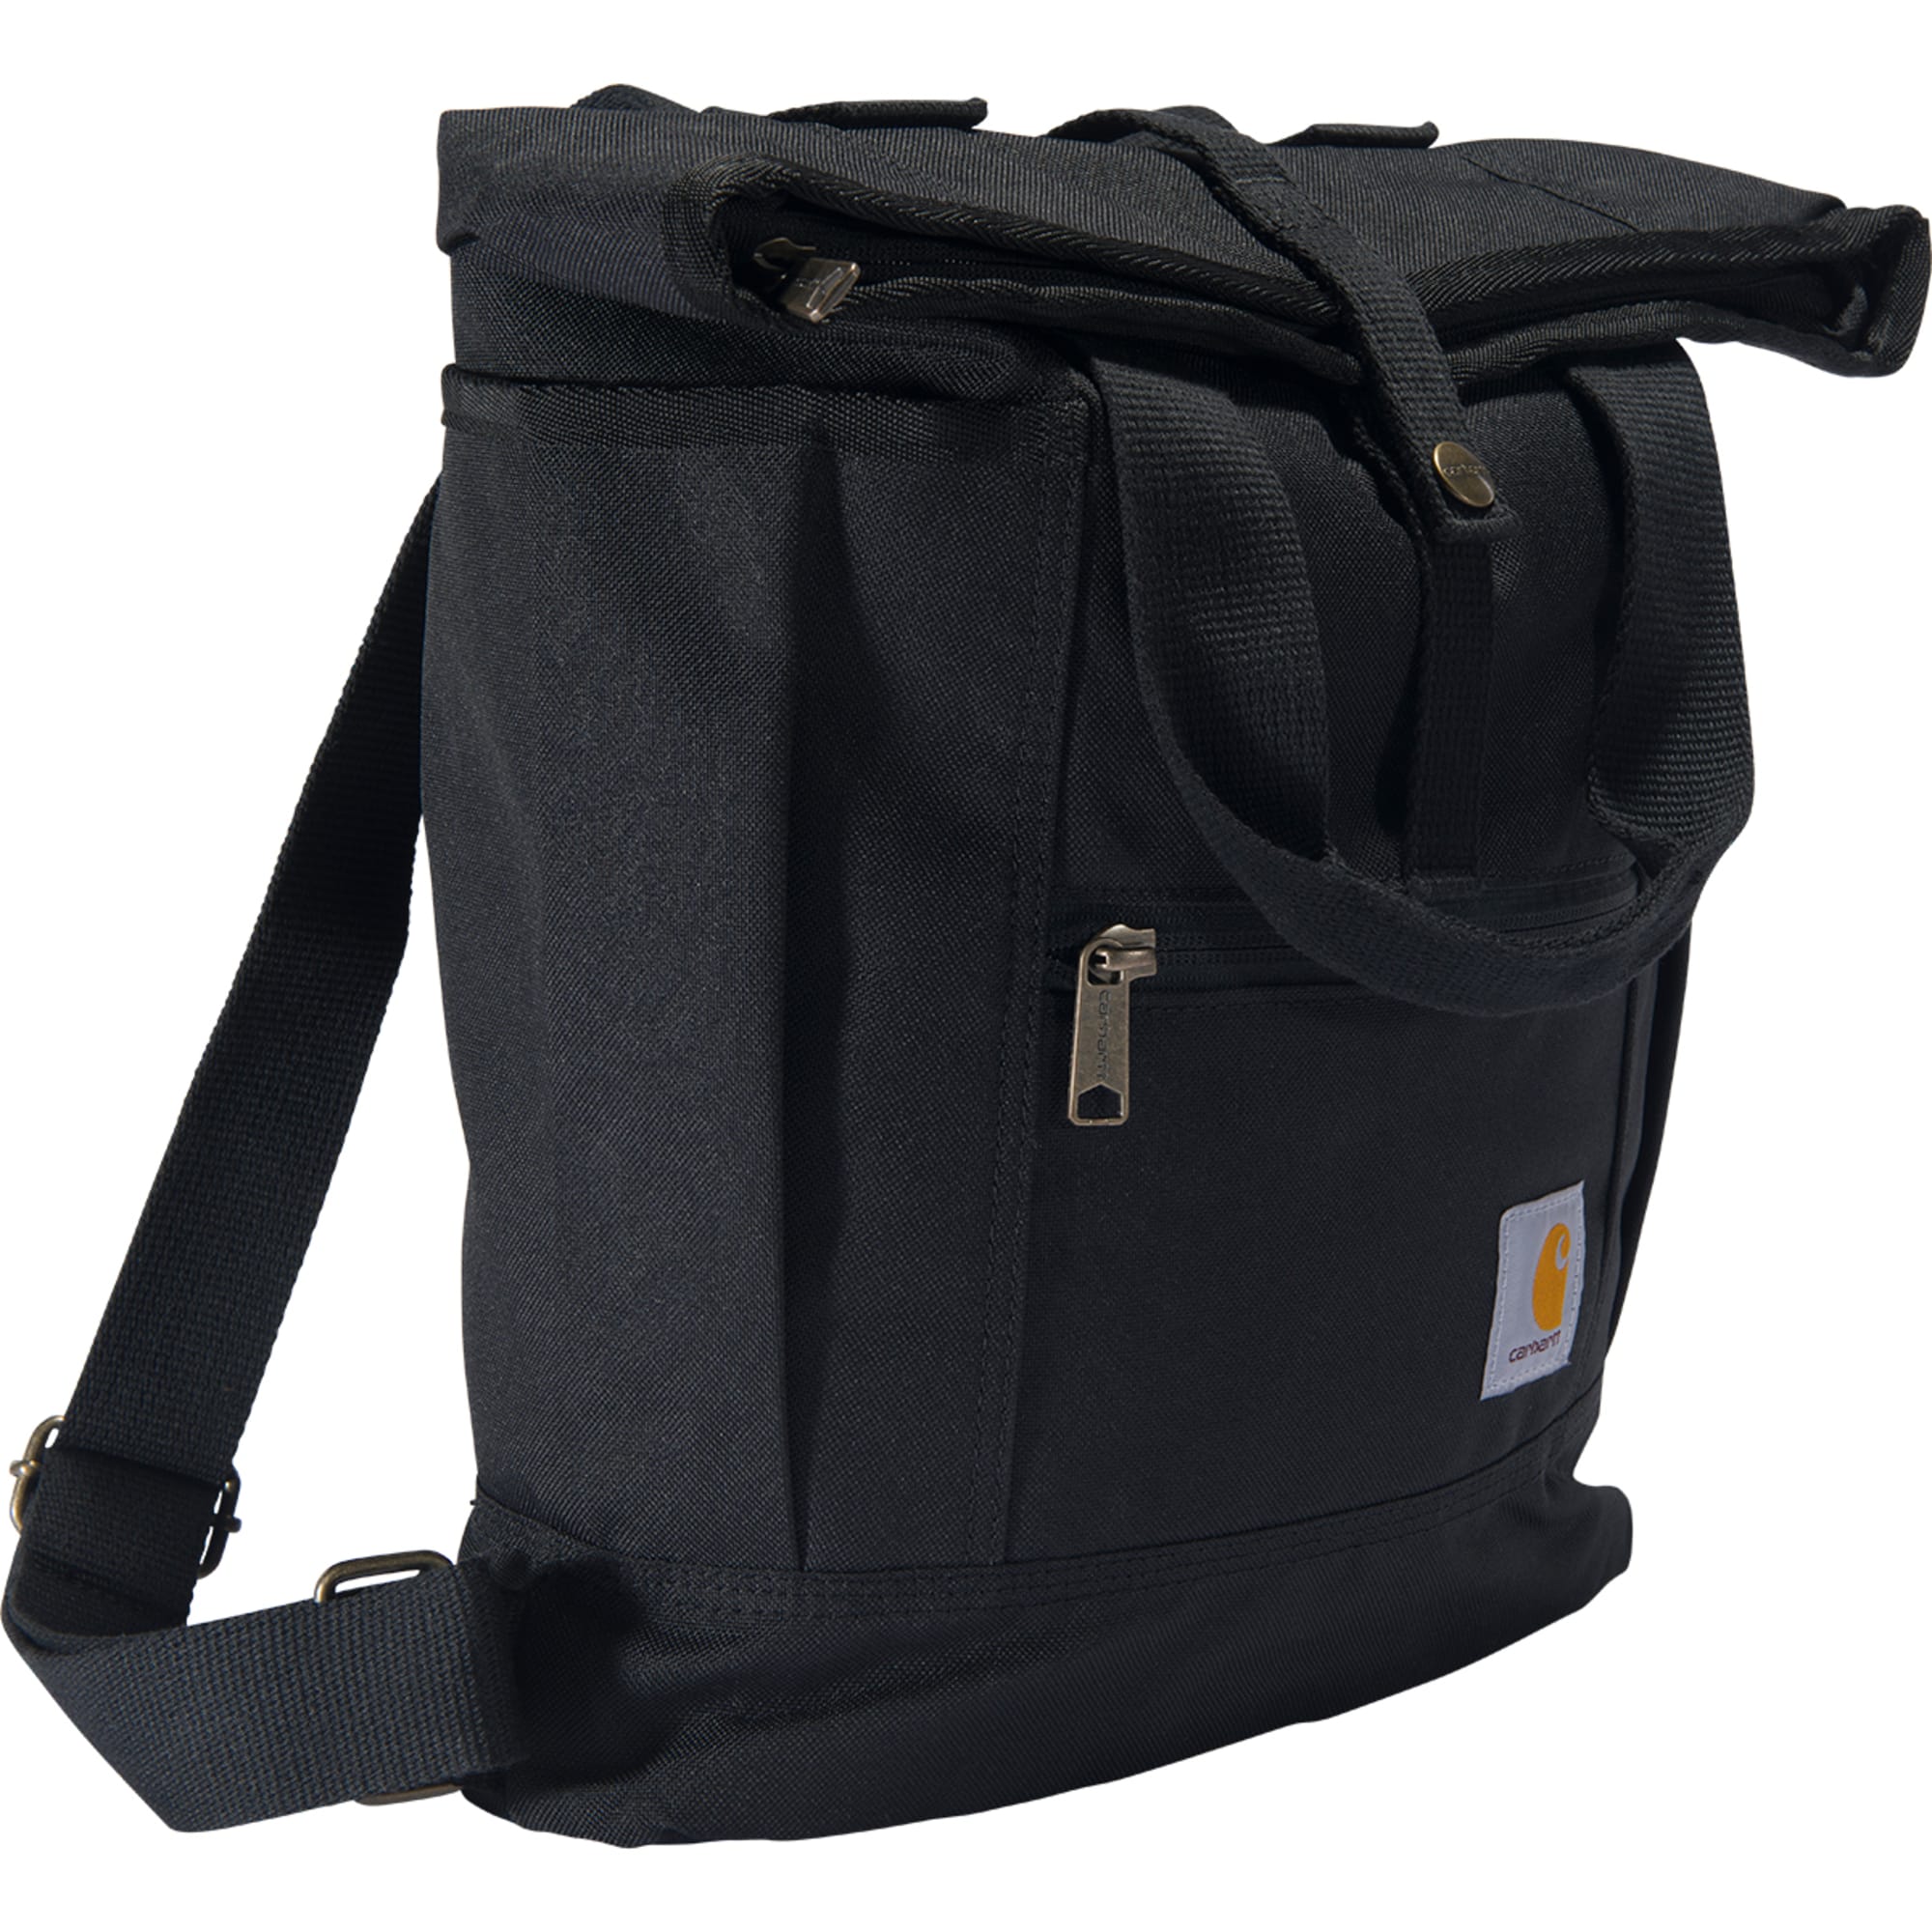 Carhartt 23.23 in. Convertible Backpack Tote Black OS